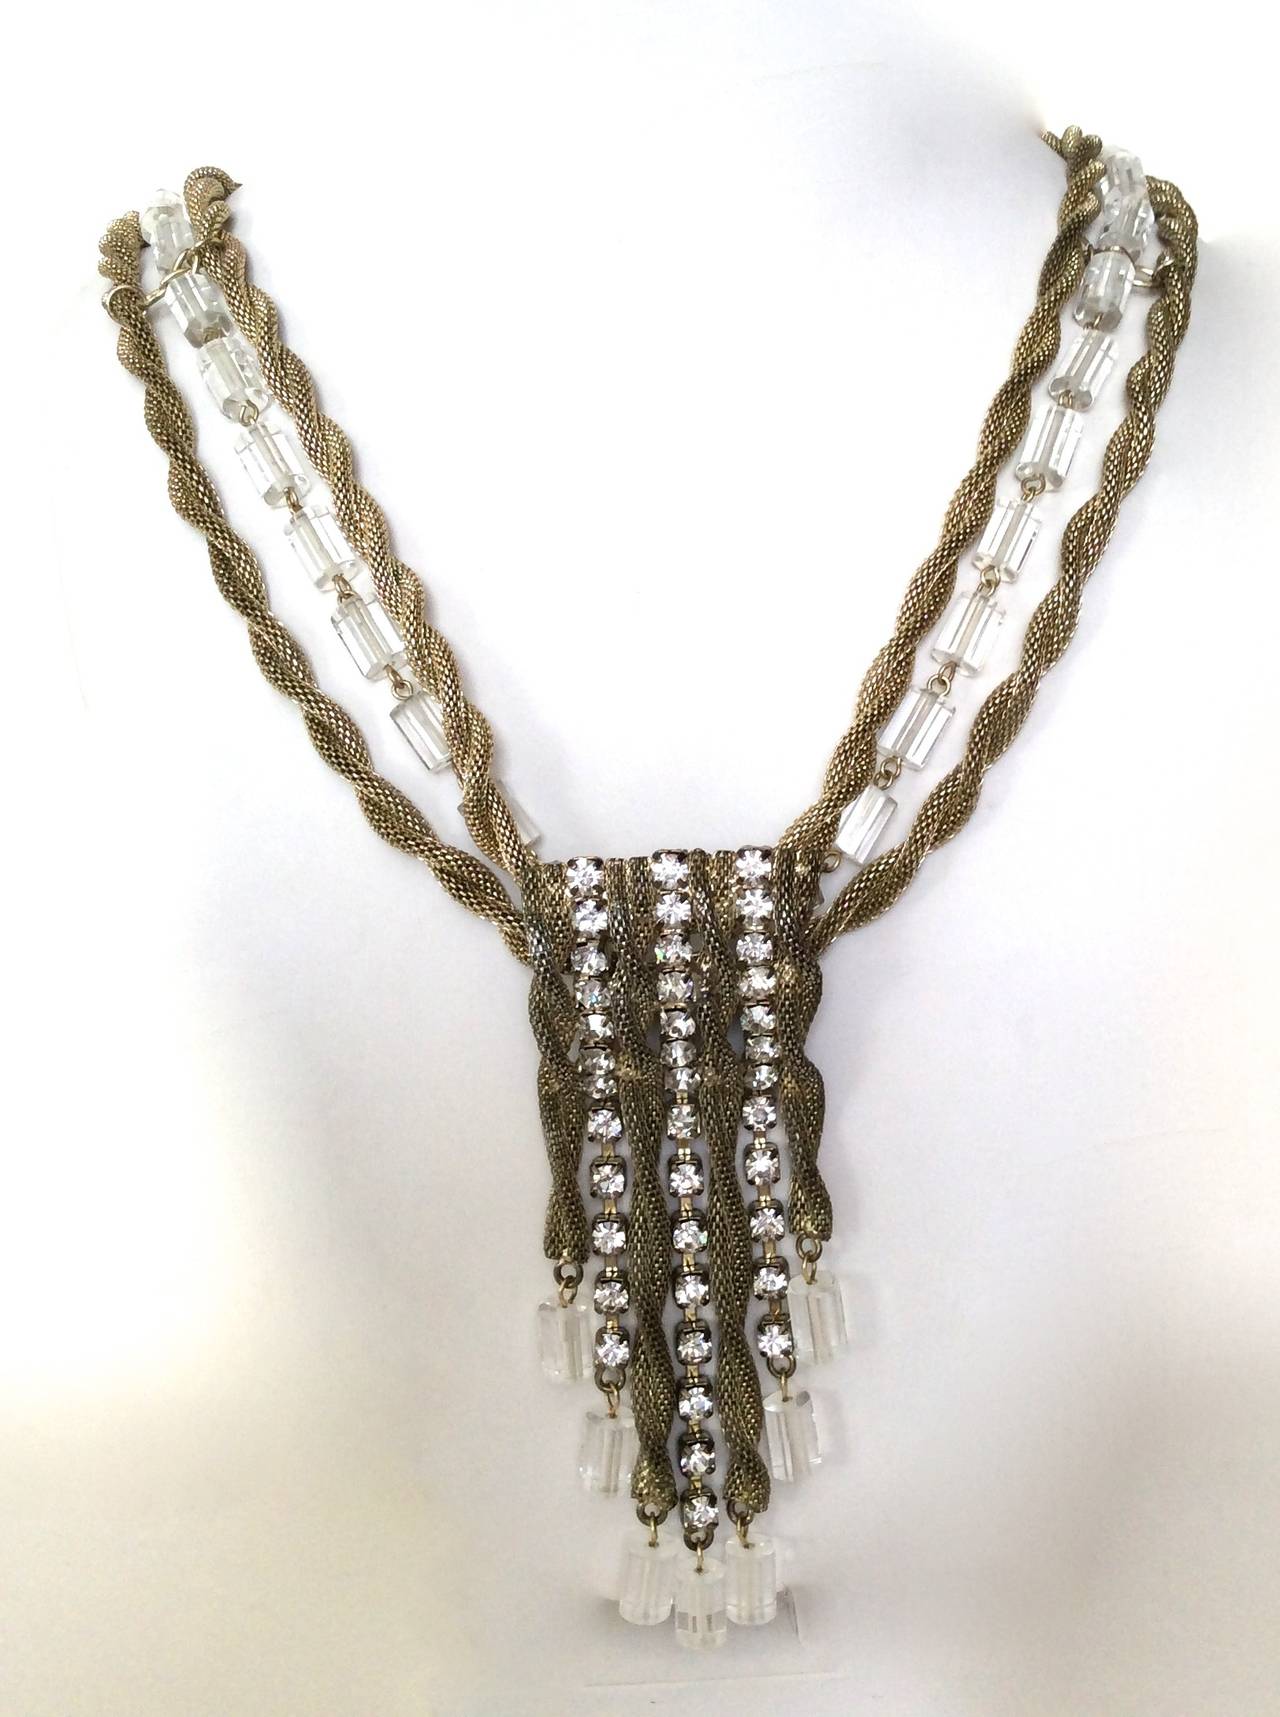 Scassi Necklace with Matching Earrings - Extremely Rare For Sale 2